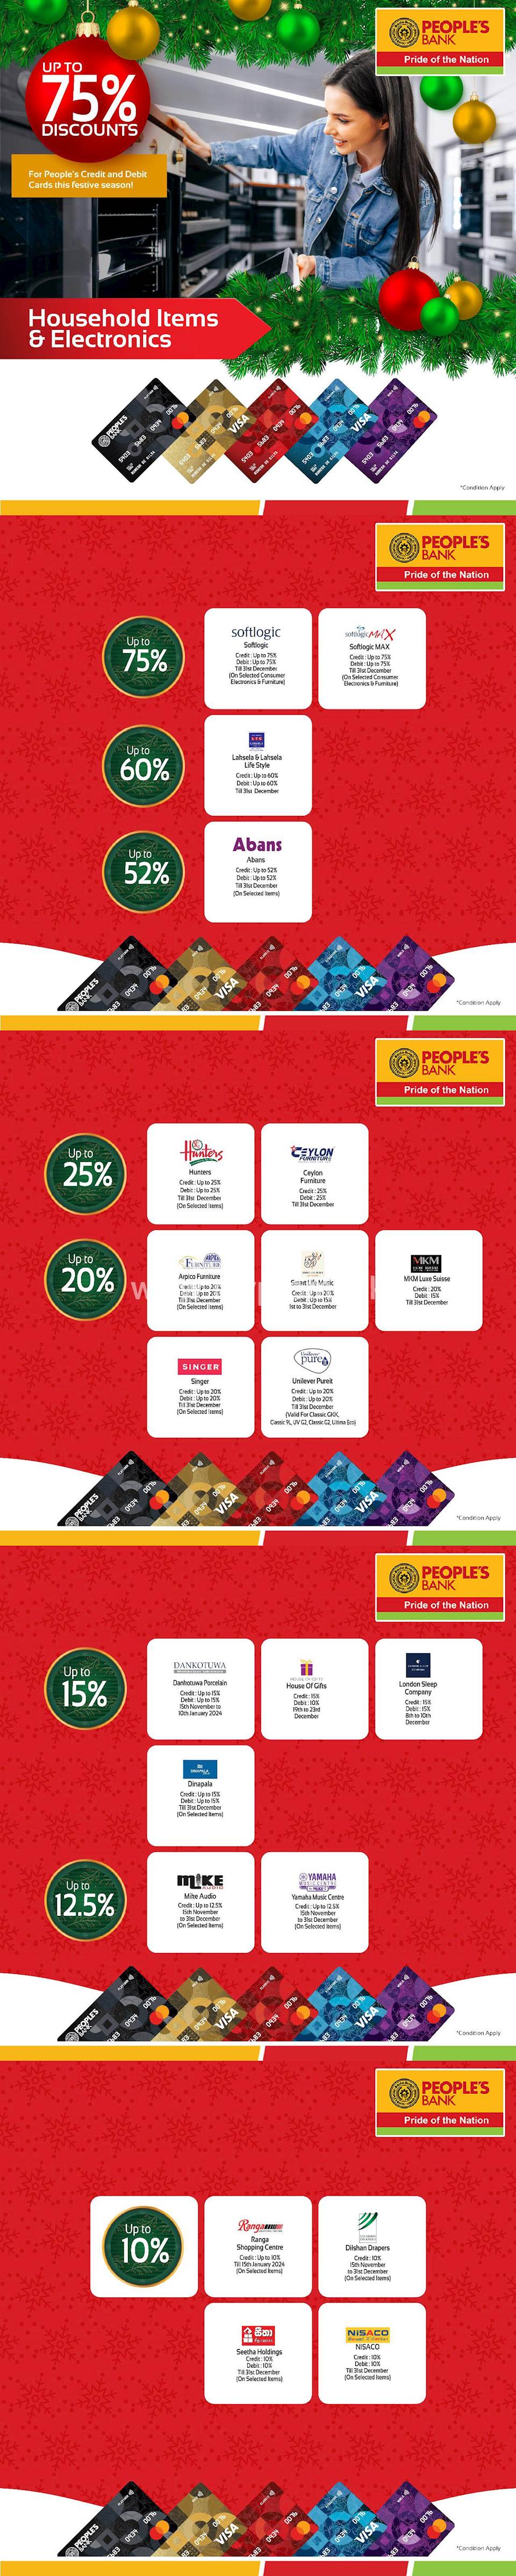 Up to 75% discounts on Household Items and Electronics for People’s Bank Credit or Debit Card at selected shops 